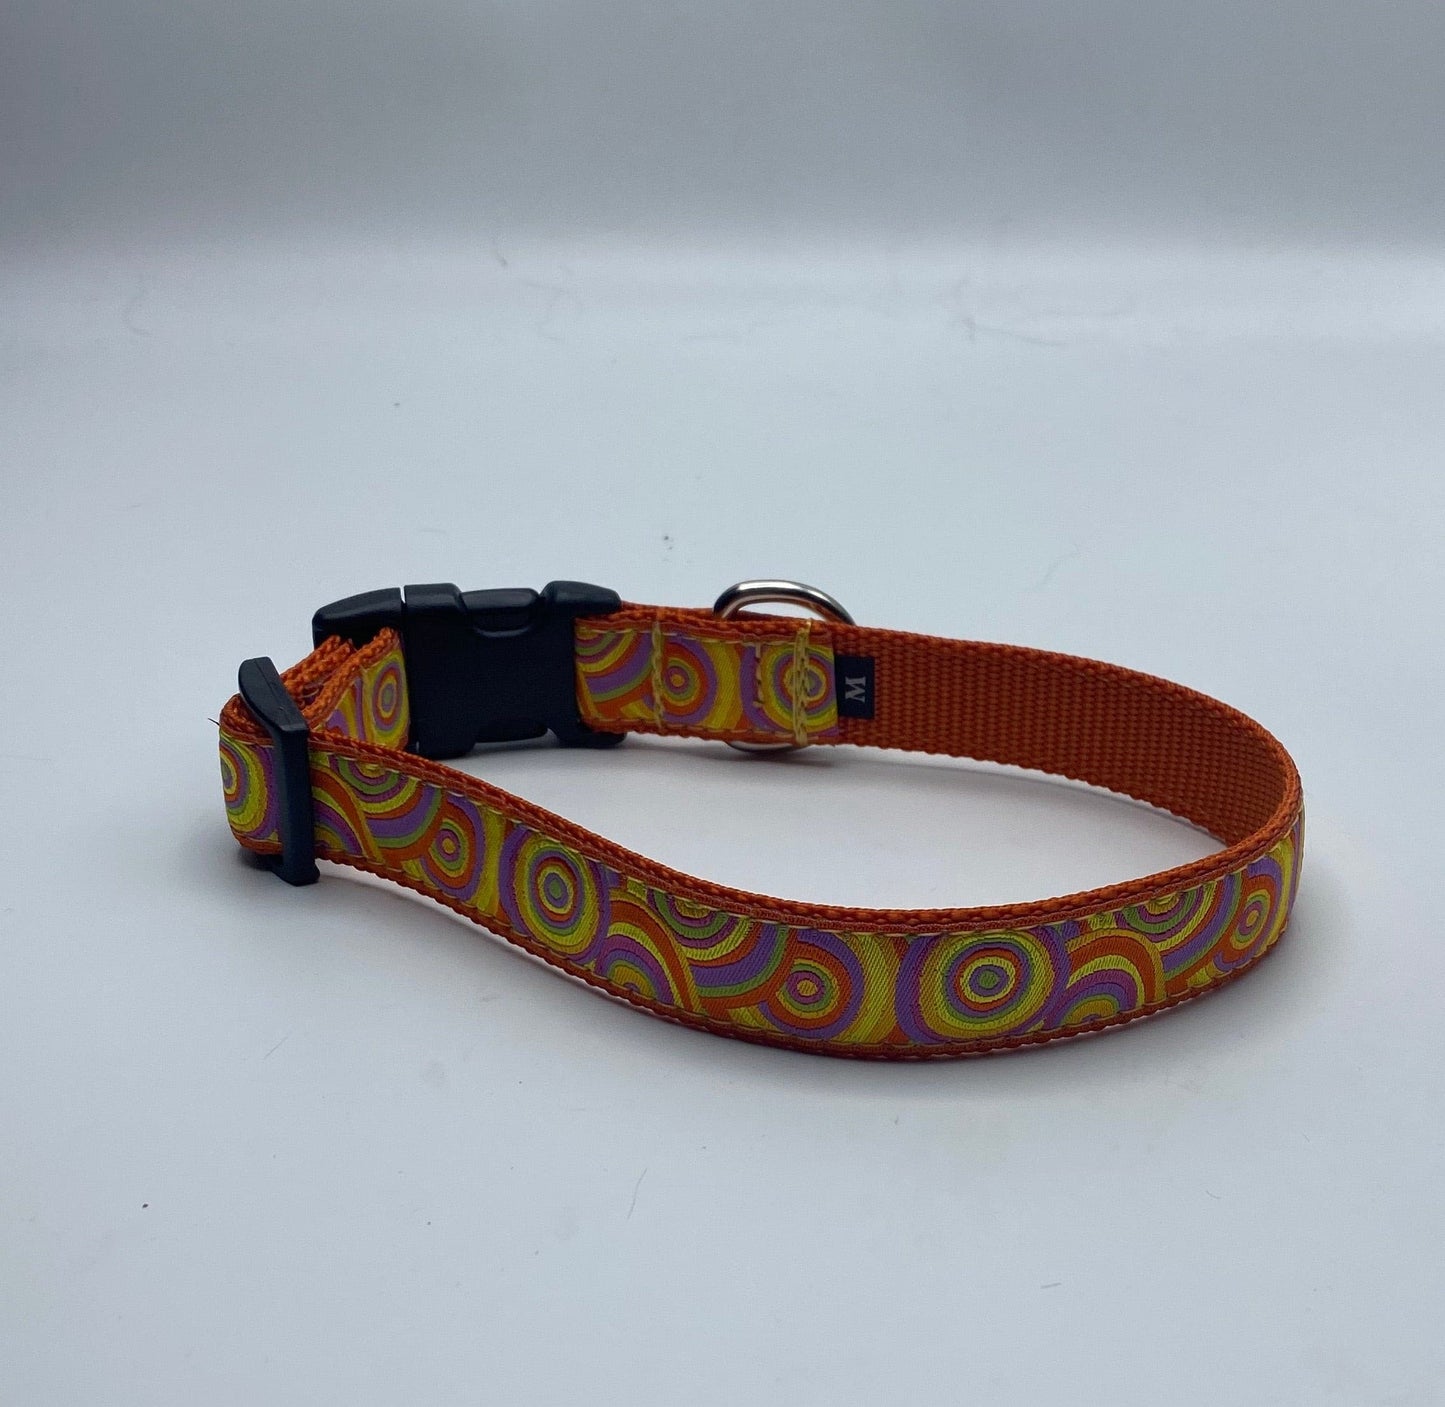 Orange Sherbet Puppy Paint Drops Dog Collars or Leads.